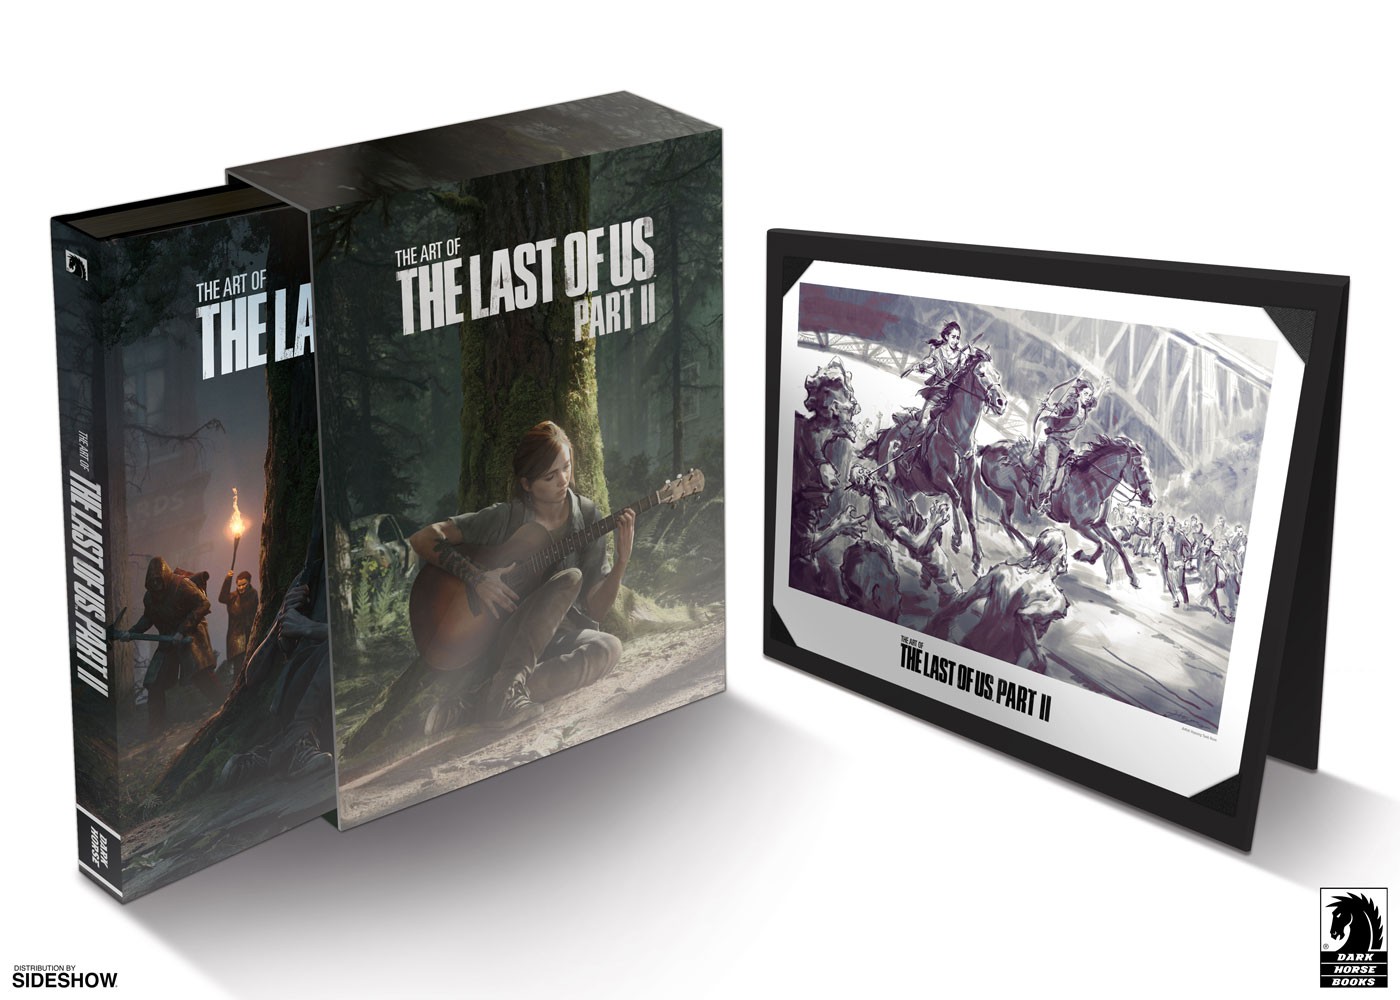 The Art of The Last of Us Part II (Deluxe Edition) (Prototype Shown) View 1